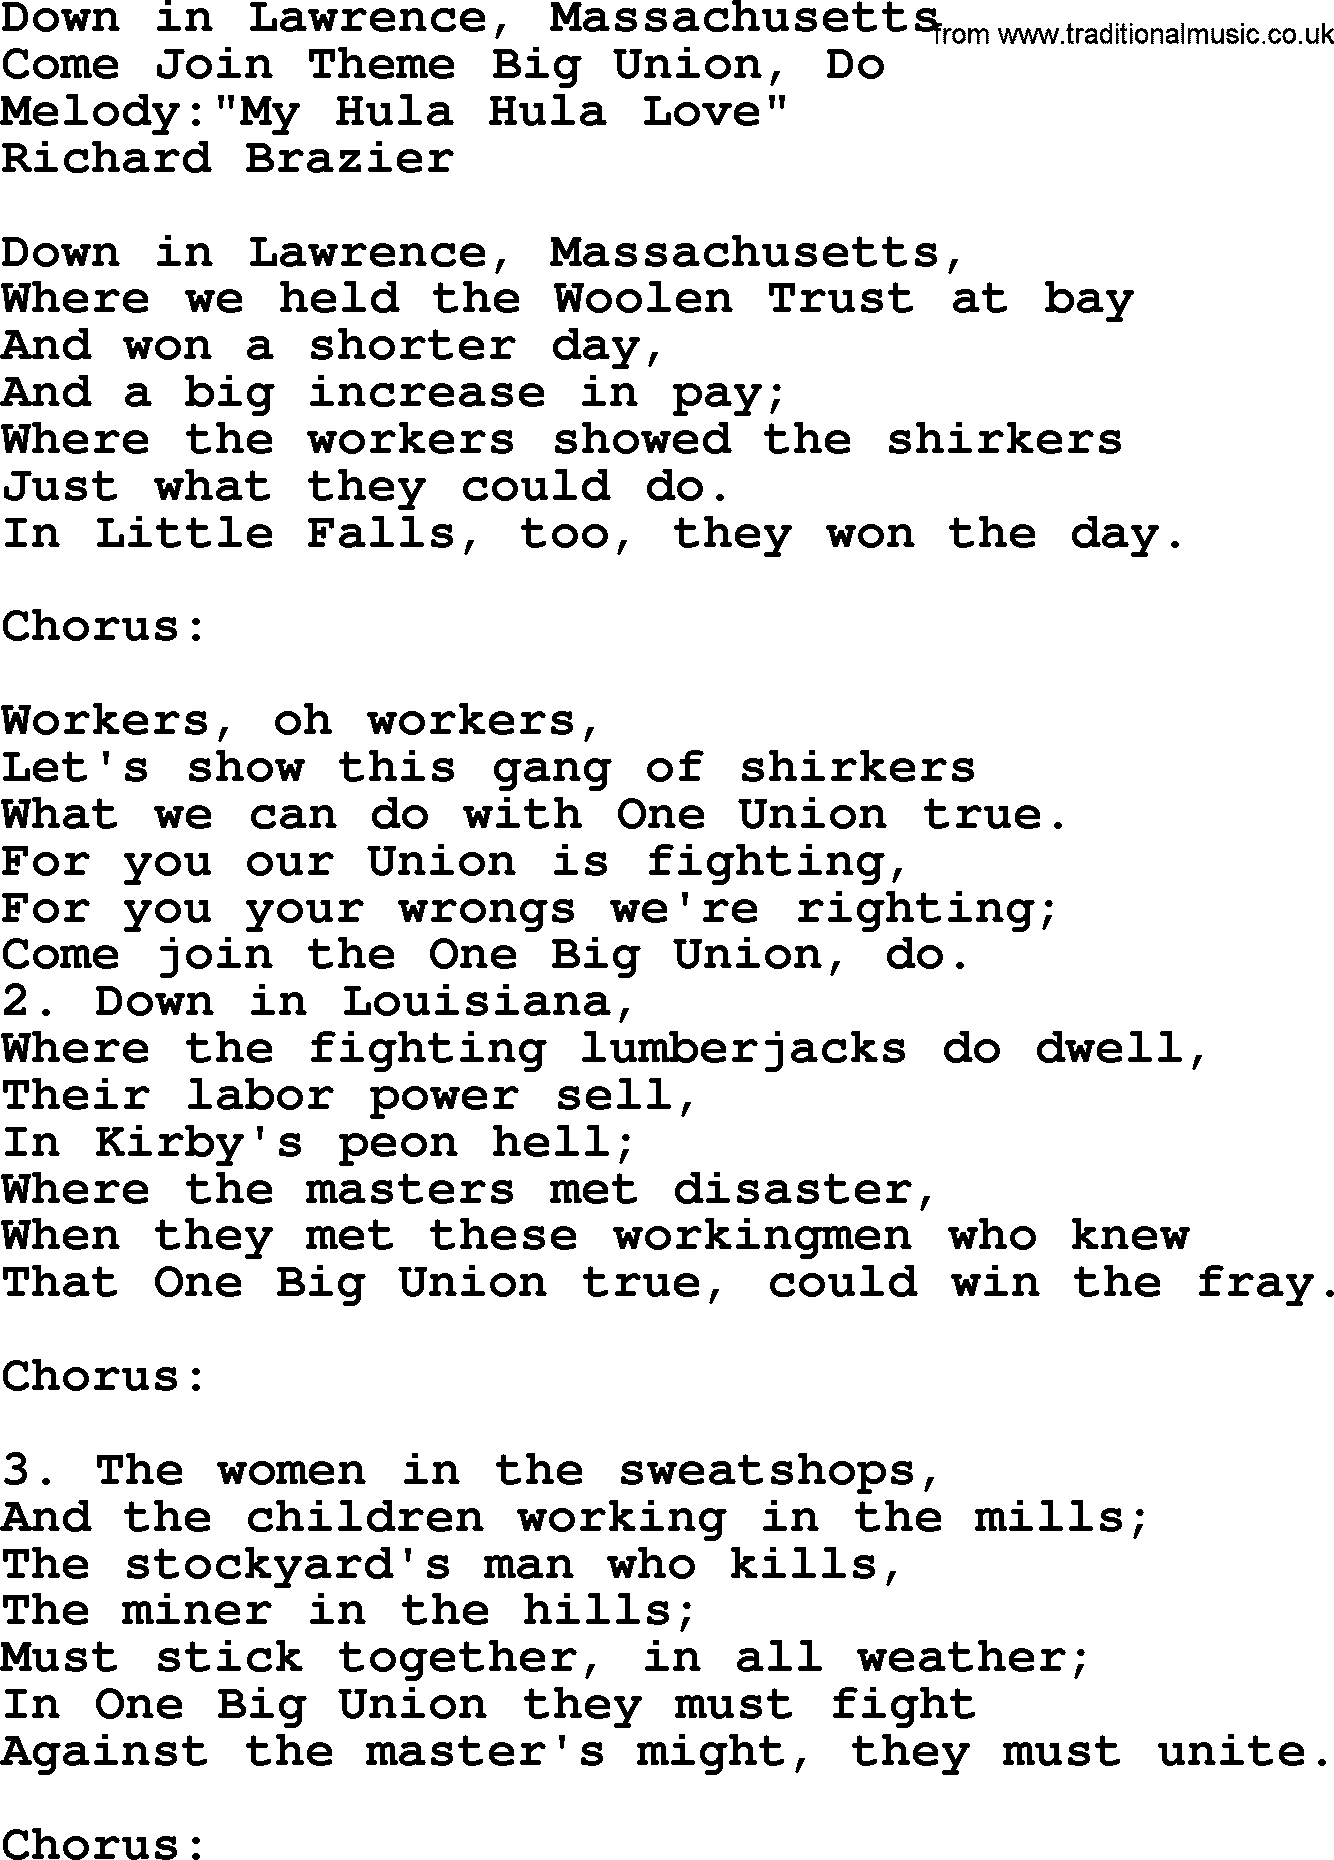 Political, Solidarity, Workers or Union song: Down In Lawrence Massachusetts, lyrics